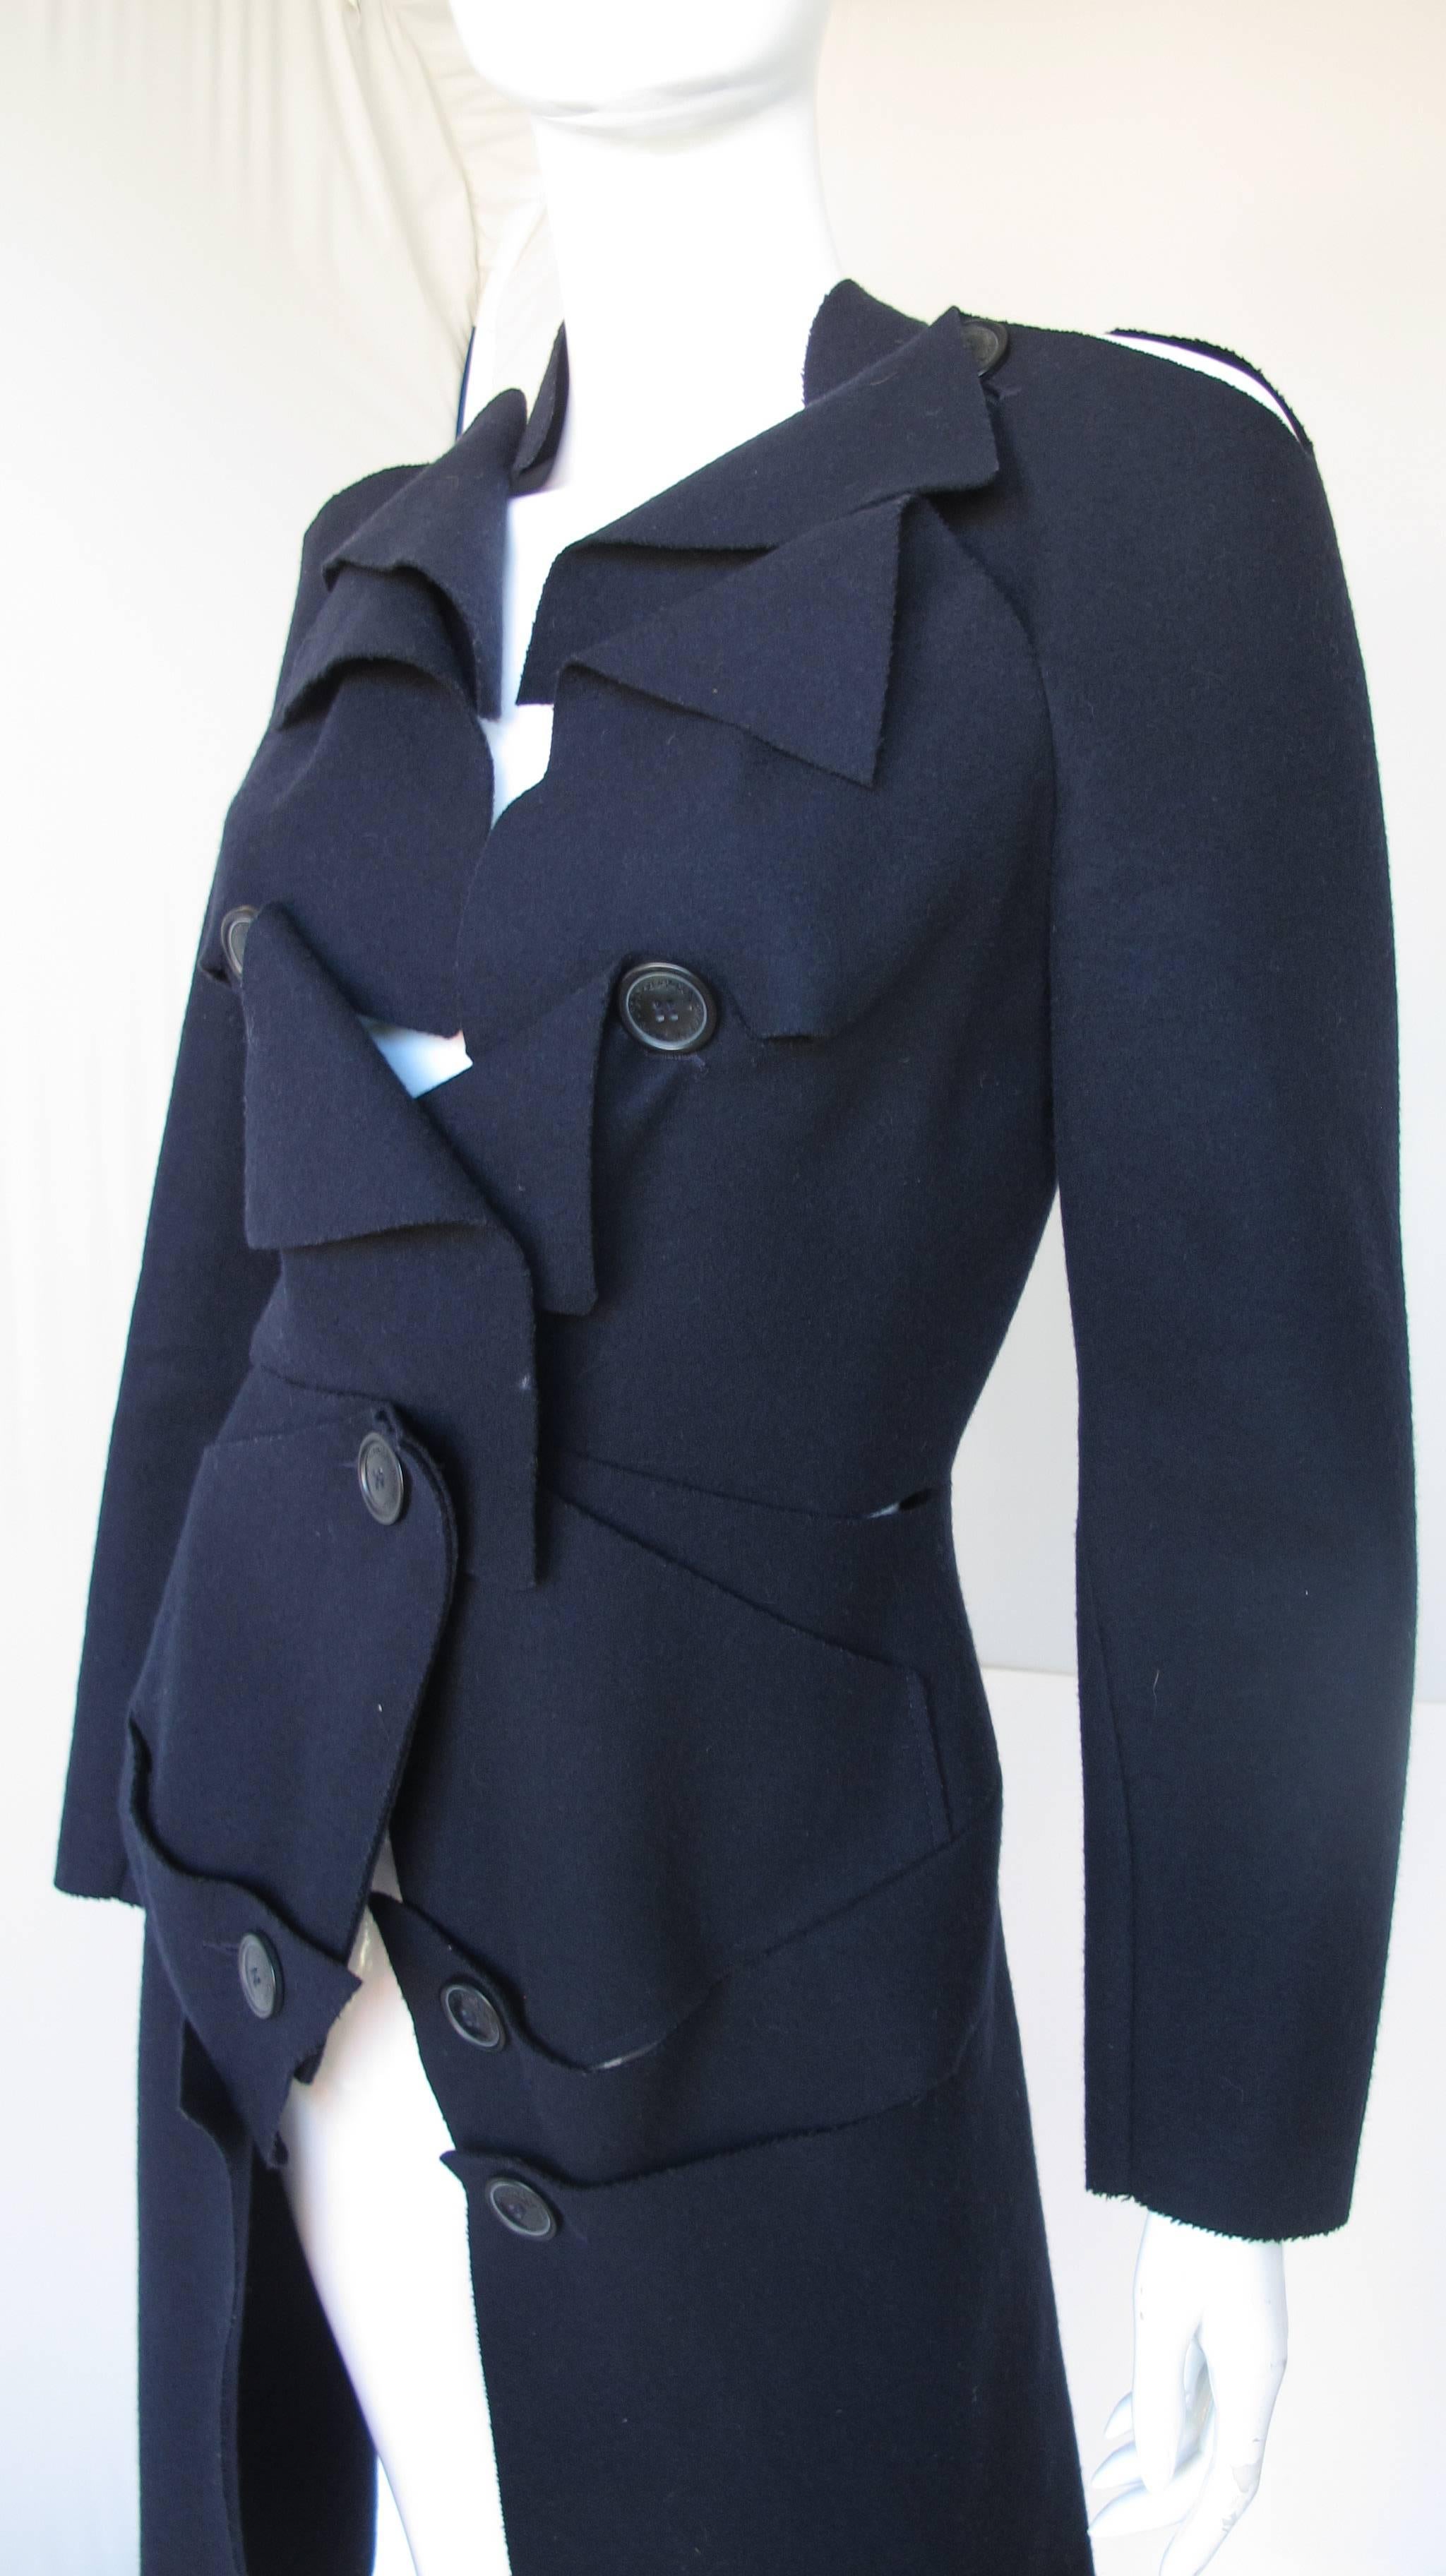 A Vivienne Westwood Anglomania navy blue wool “slashed” fitted coat with oversized buttons. Size tag 40. In excellent condition.
MEASUREMENTS:
Waist – 28